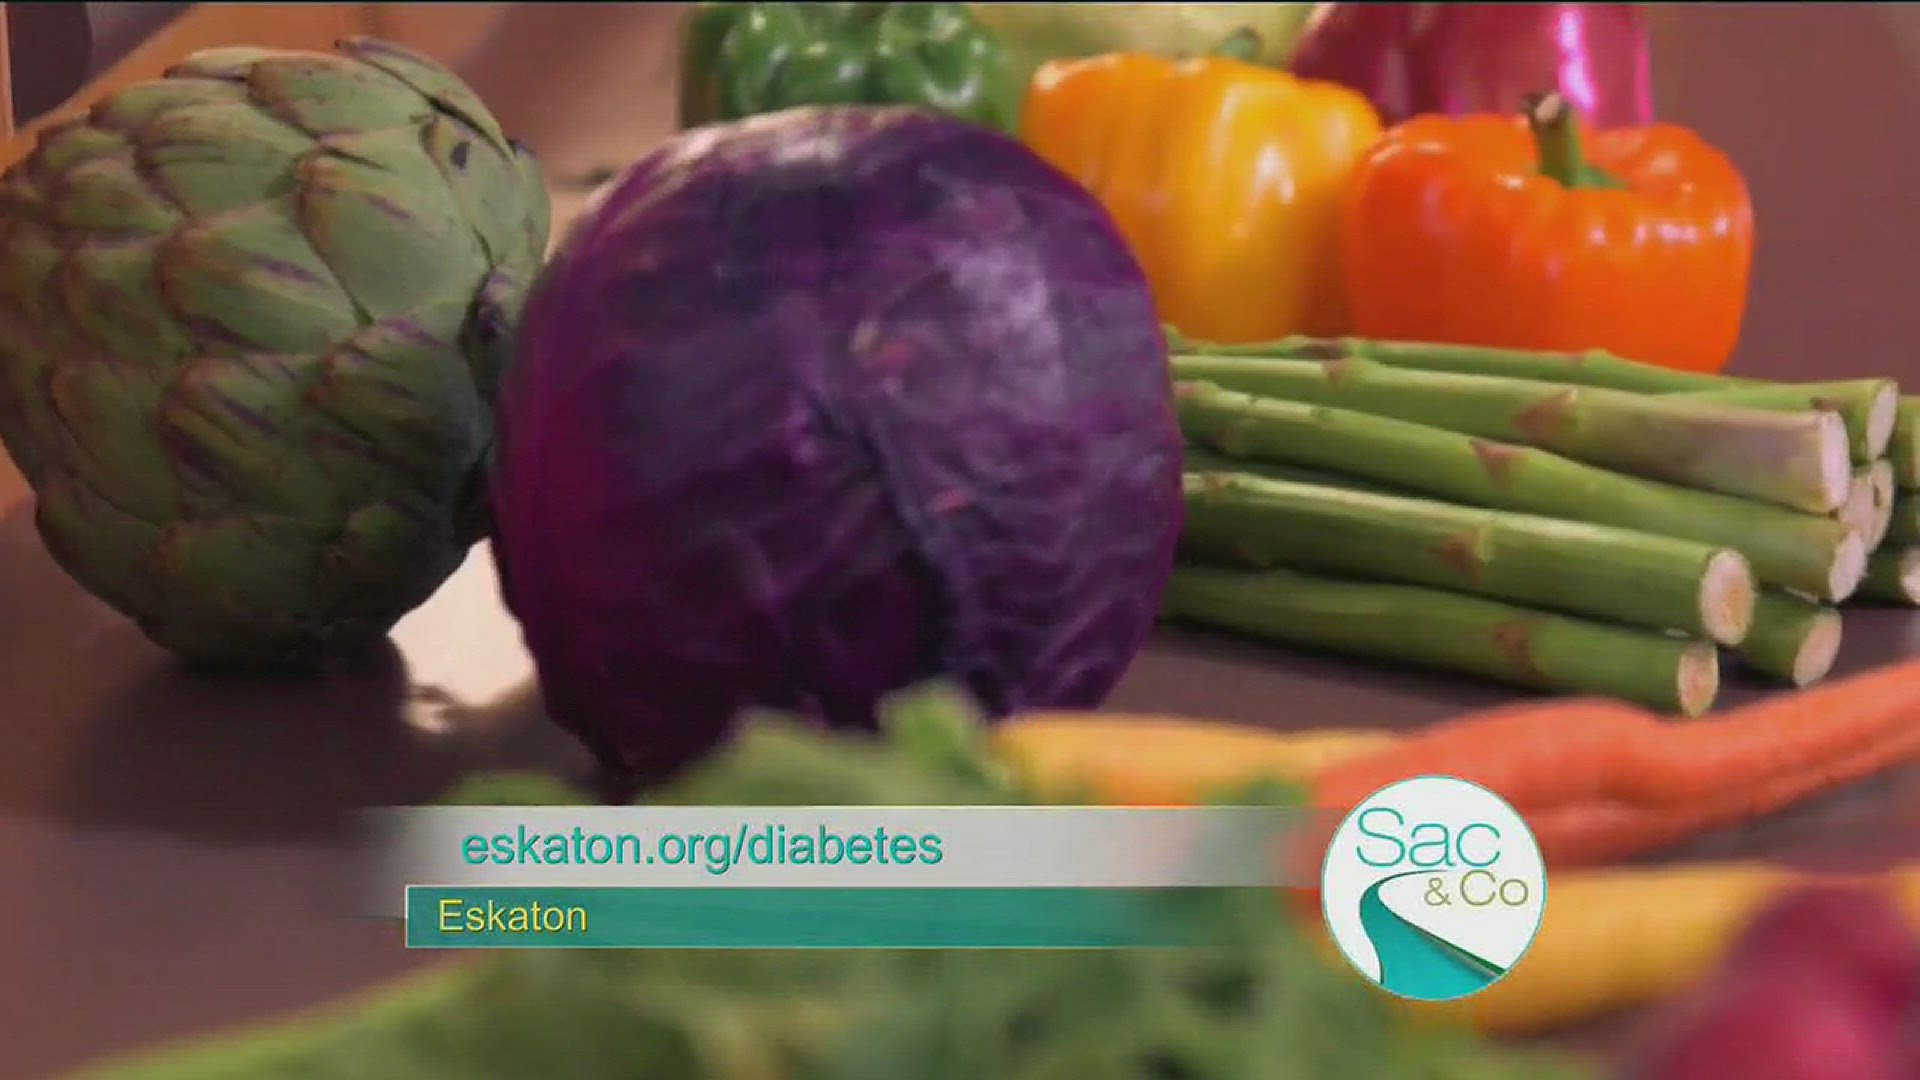 Eskaton is helping individuals diagnosed with diabetes with their special diabetes management program.